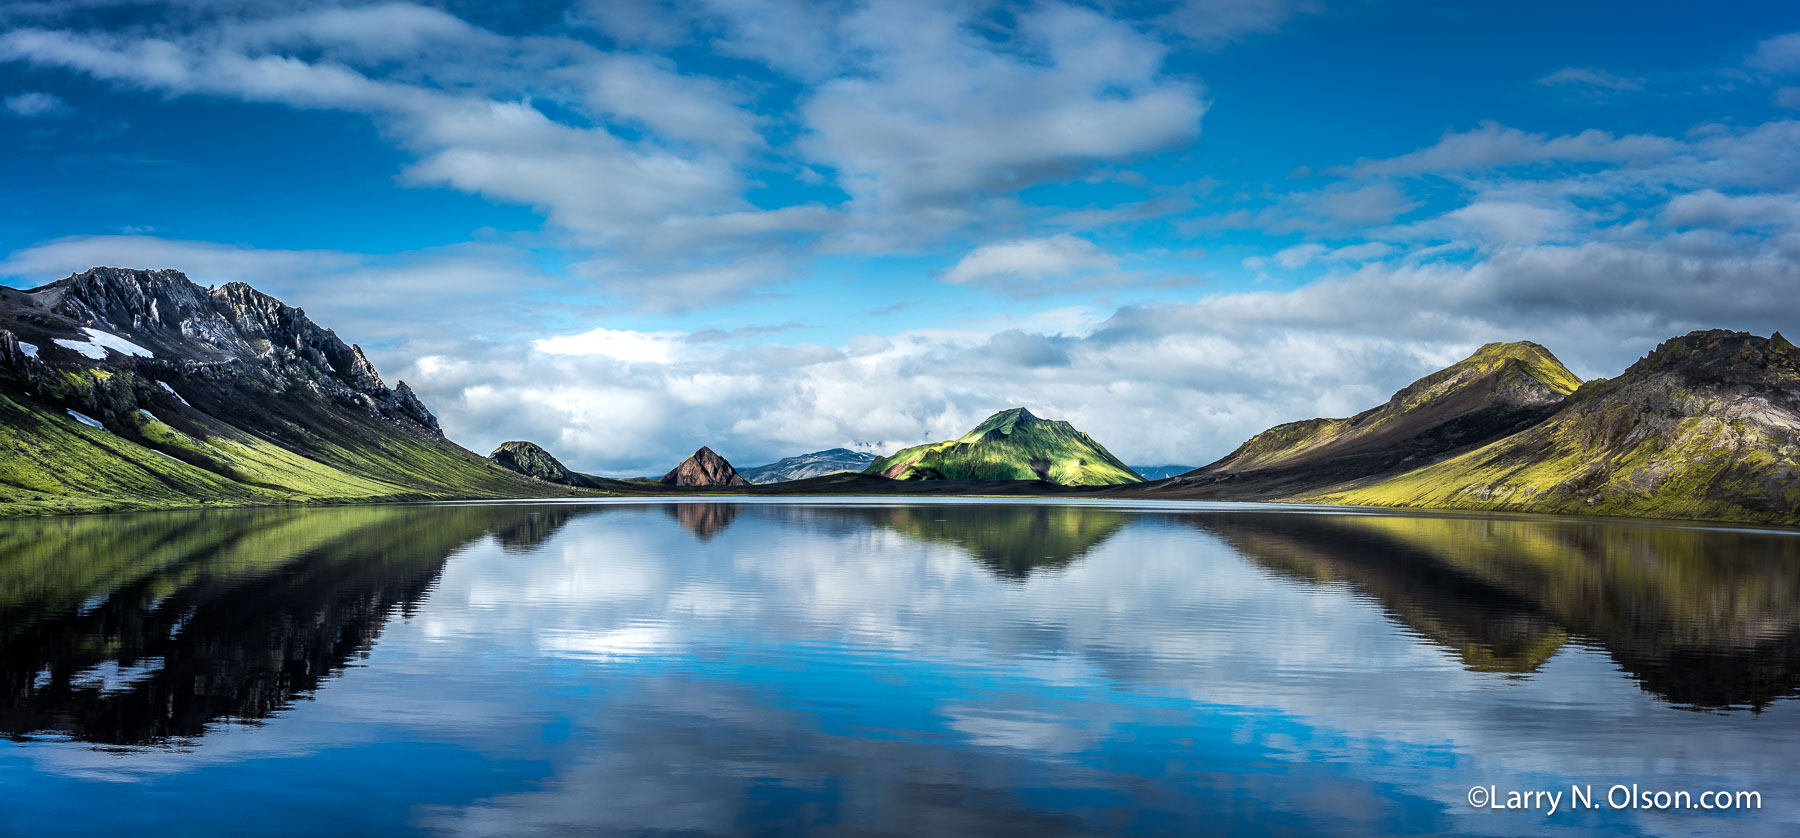 Alftavatn #2, Iceland | The  lake is serene in the early morning at Alftavatn.